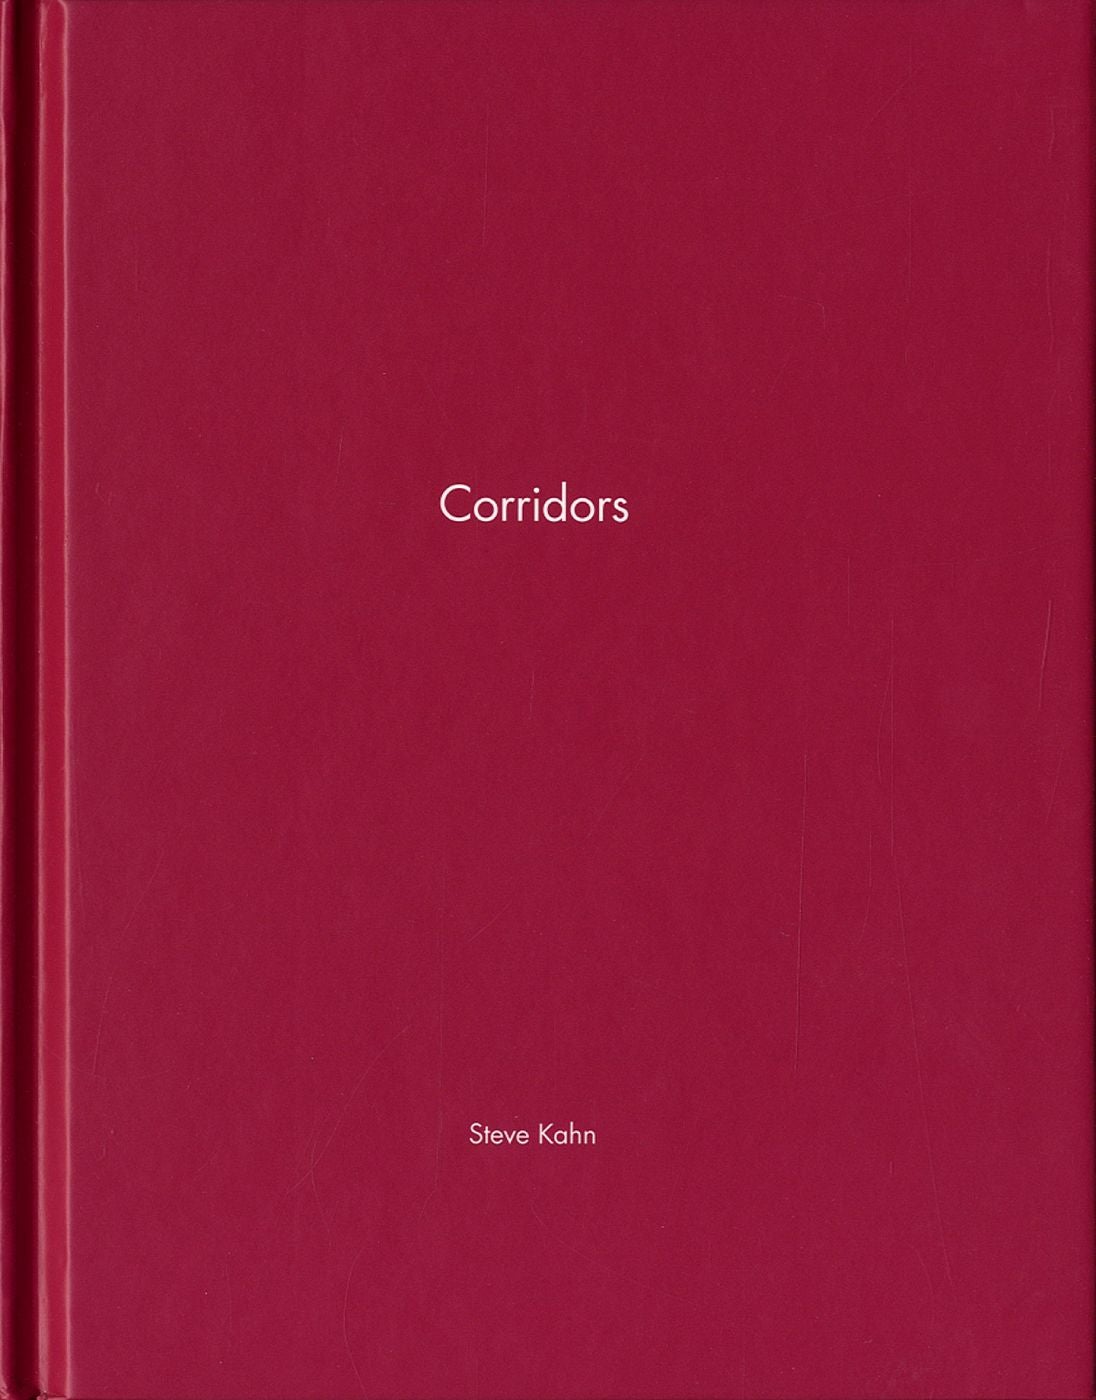 Steve Kahn: Corridors (One Picture Book #89), Limited Edition (with Print)